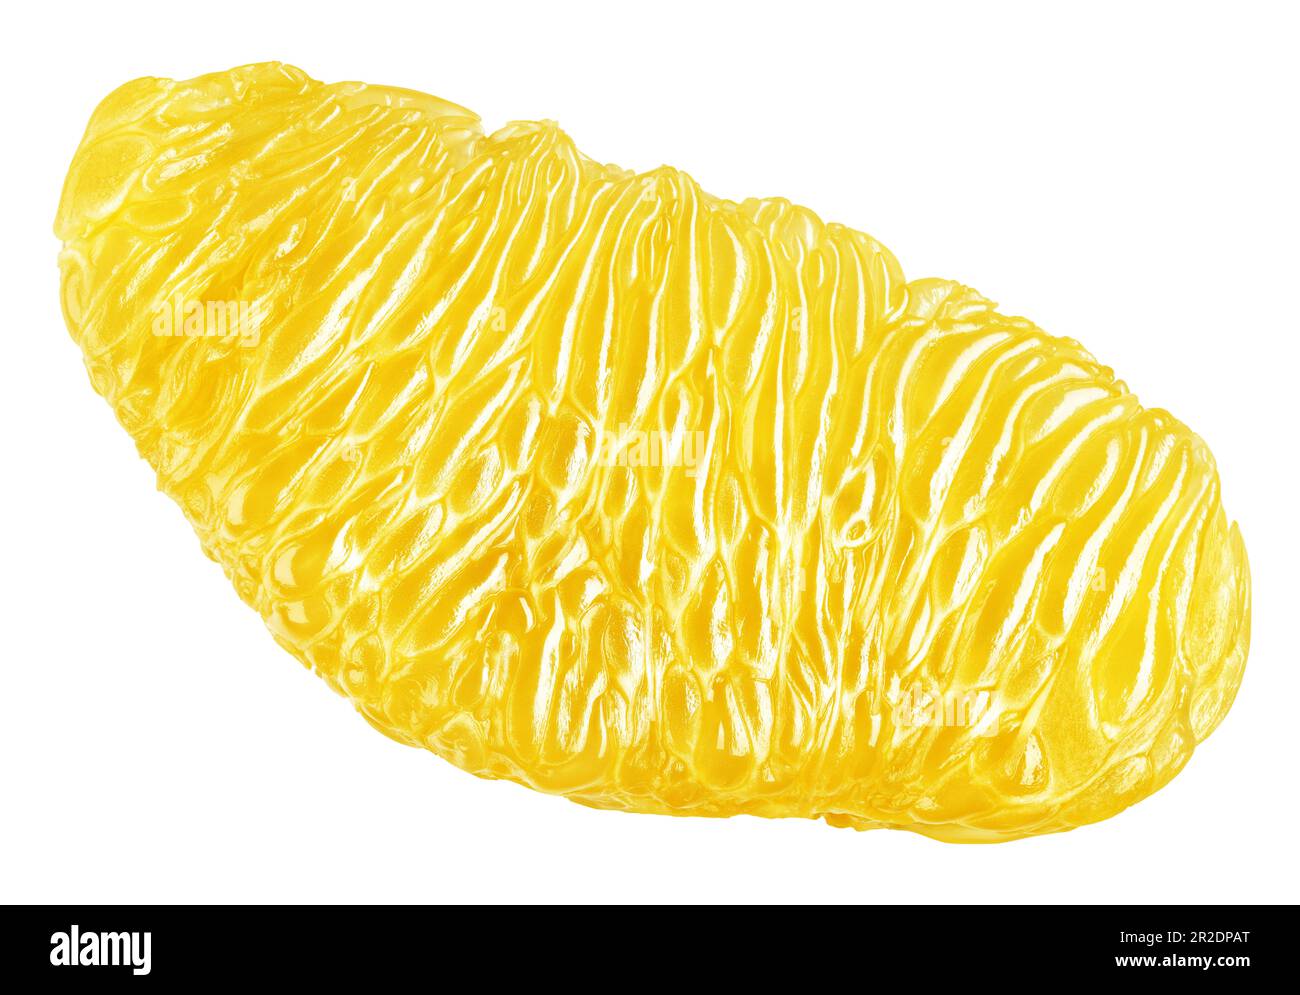 Flesh of lemon citrus slice isolated on white background with clipping path. Lemon pulp. Full depth of field. Stock Photo